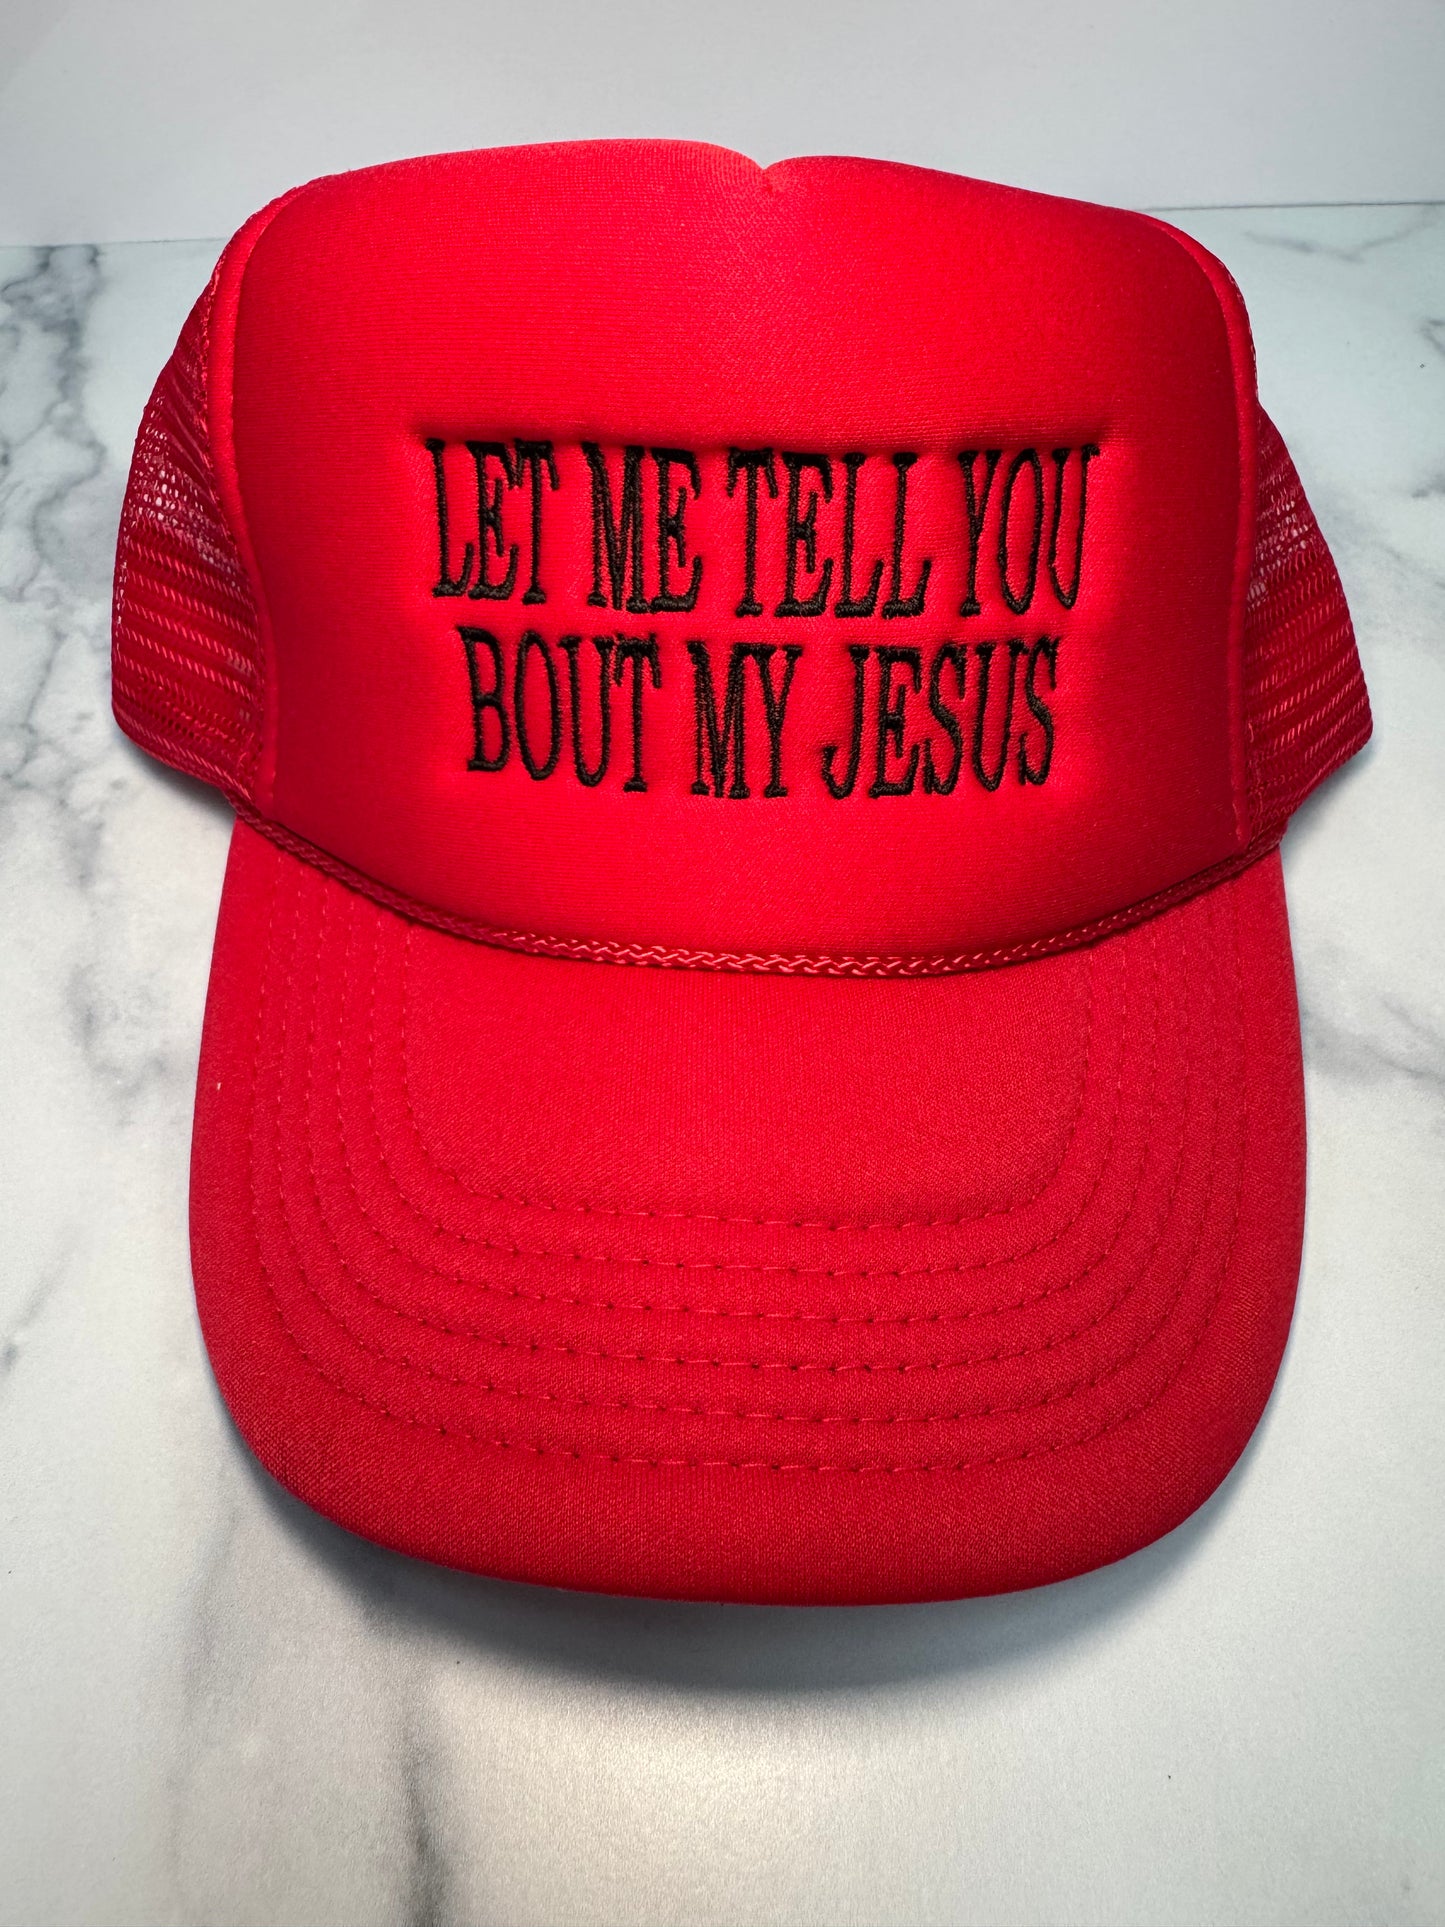 Let Me Tell You Hat